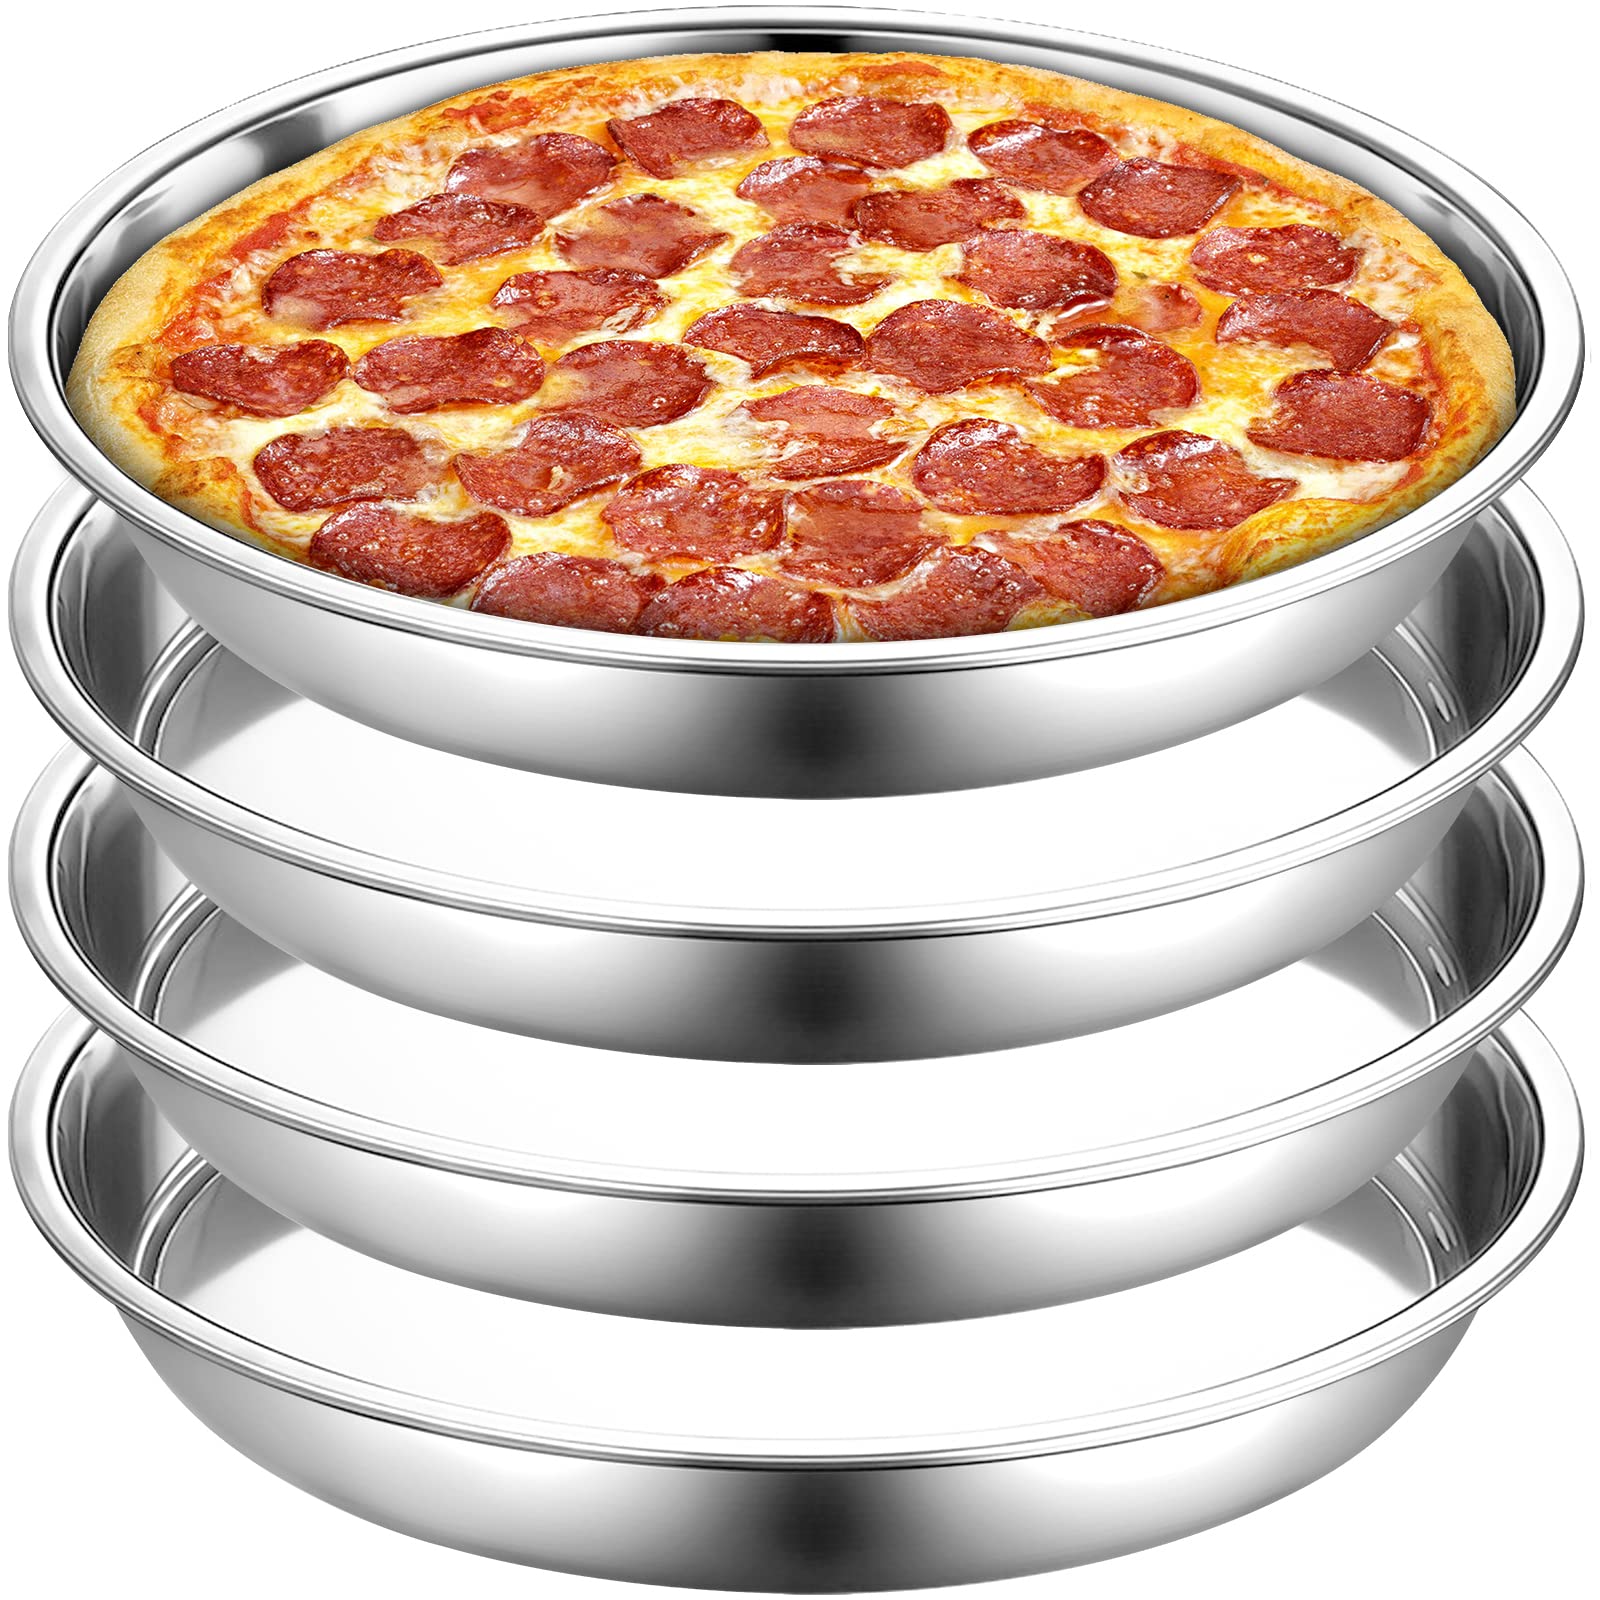 Elsjoy 4 Pack 13 Inch Stainless Steel Pizza Pan, Deep Round Baking Pan Large Pizza Baking Tray, Heavy-Duty Pizza Dish Non-Stick Baking Sheet for Oven, Dishwasher Safe